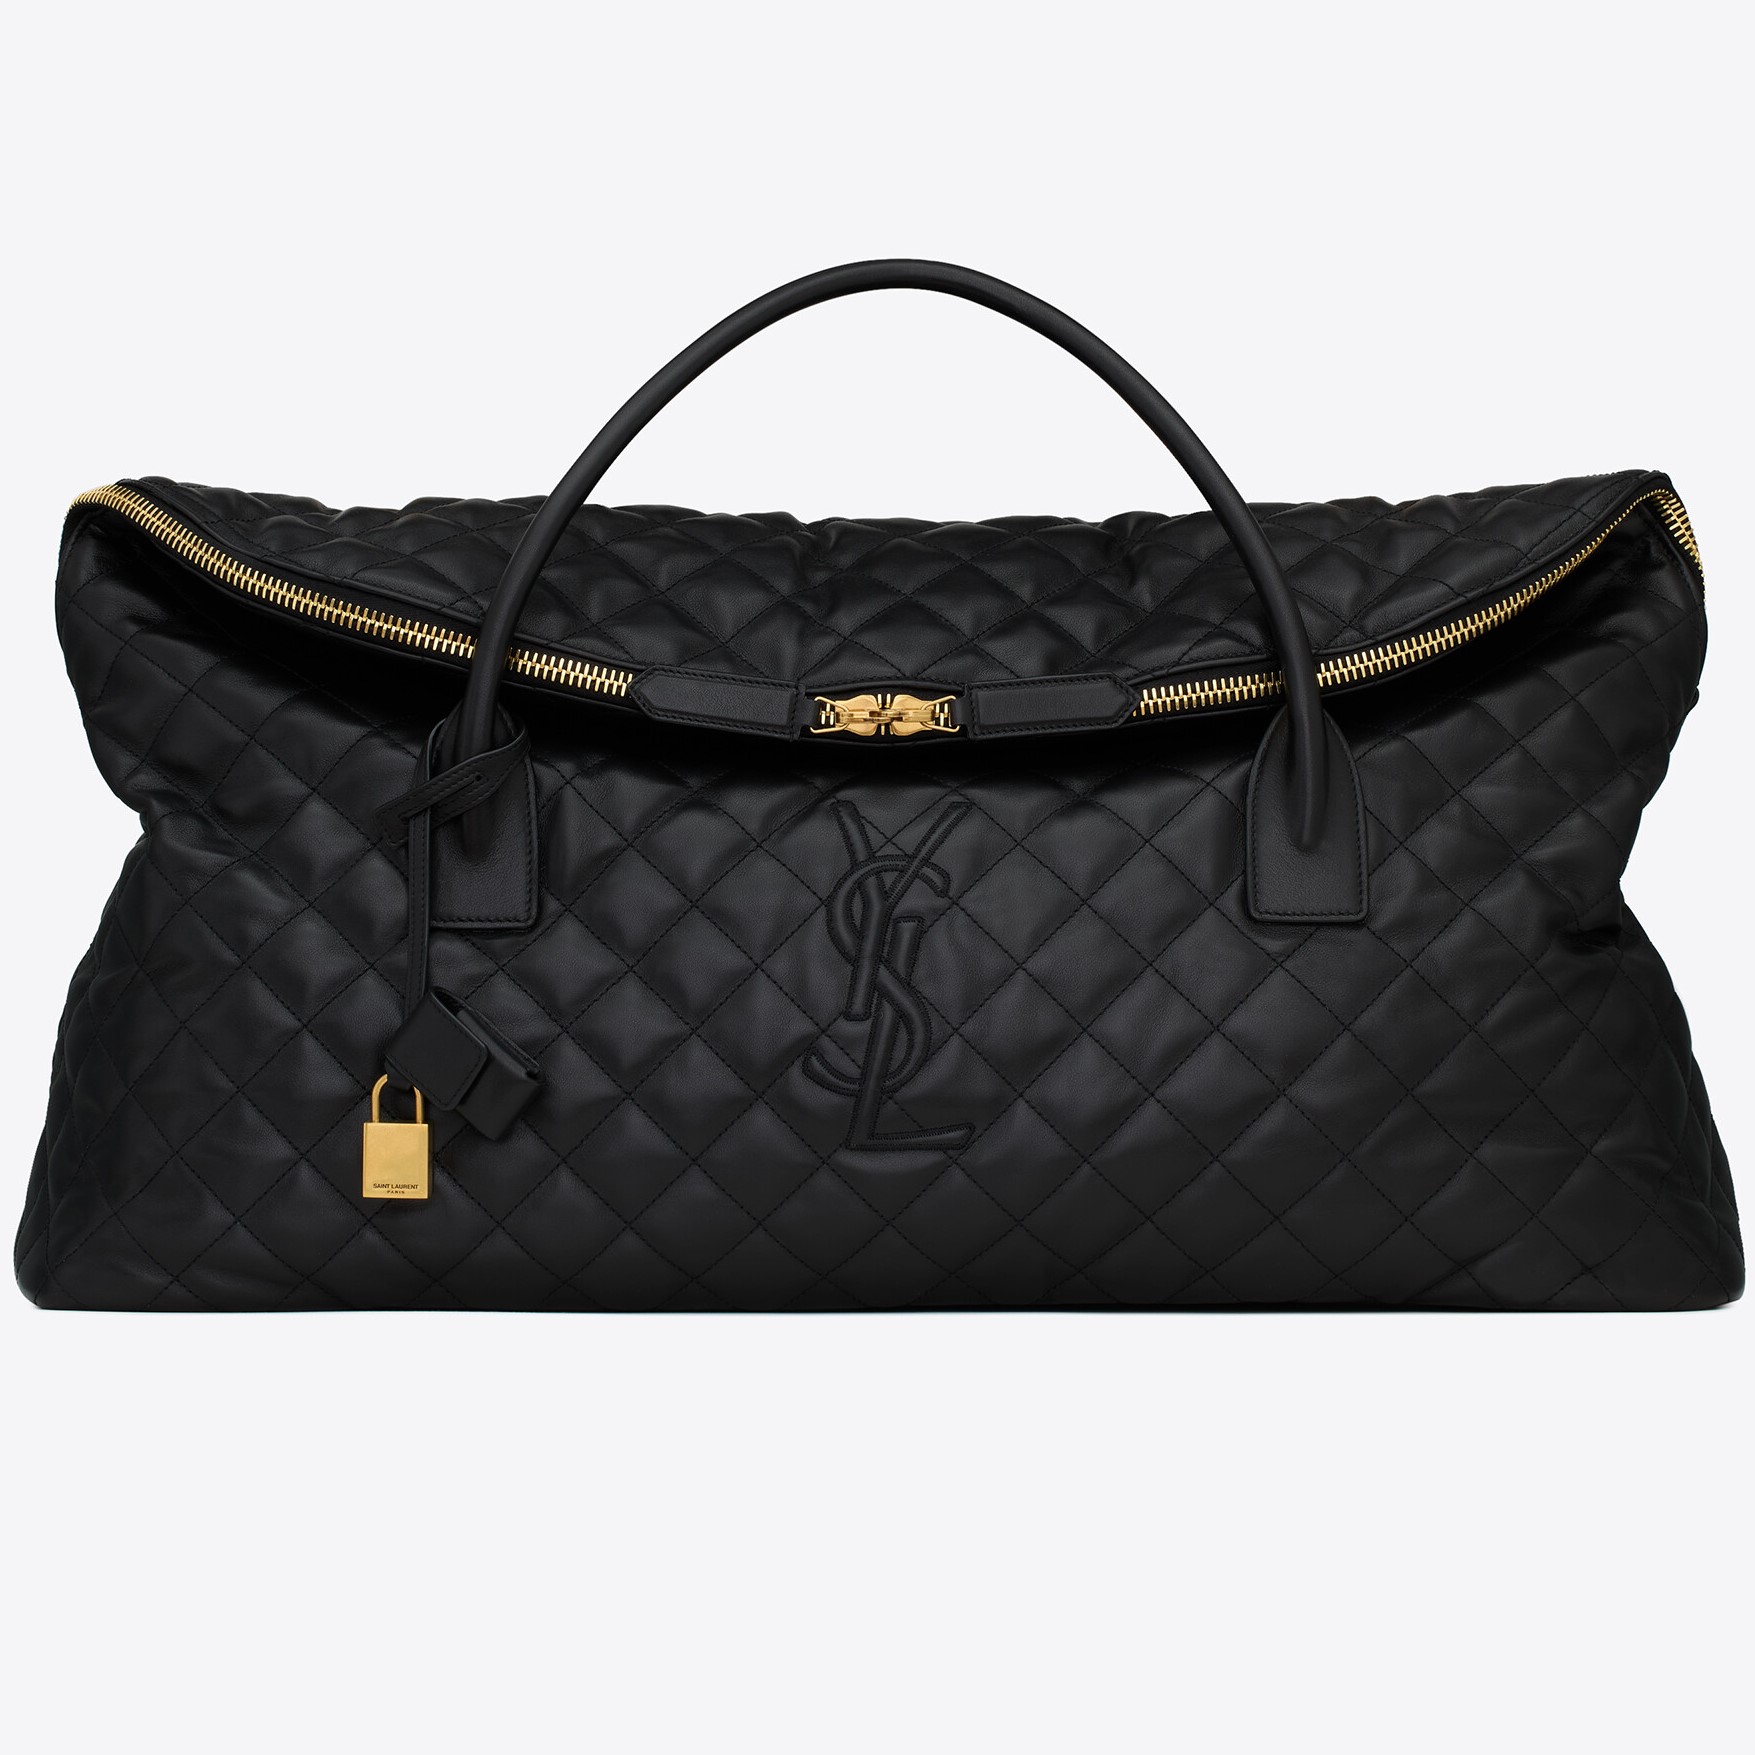 TÚI XÁCH DU LỊCH YSL ES GIANT TRAVEL BAG IN QUILTED LEATHER 10